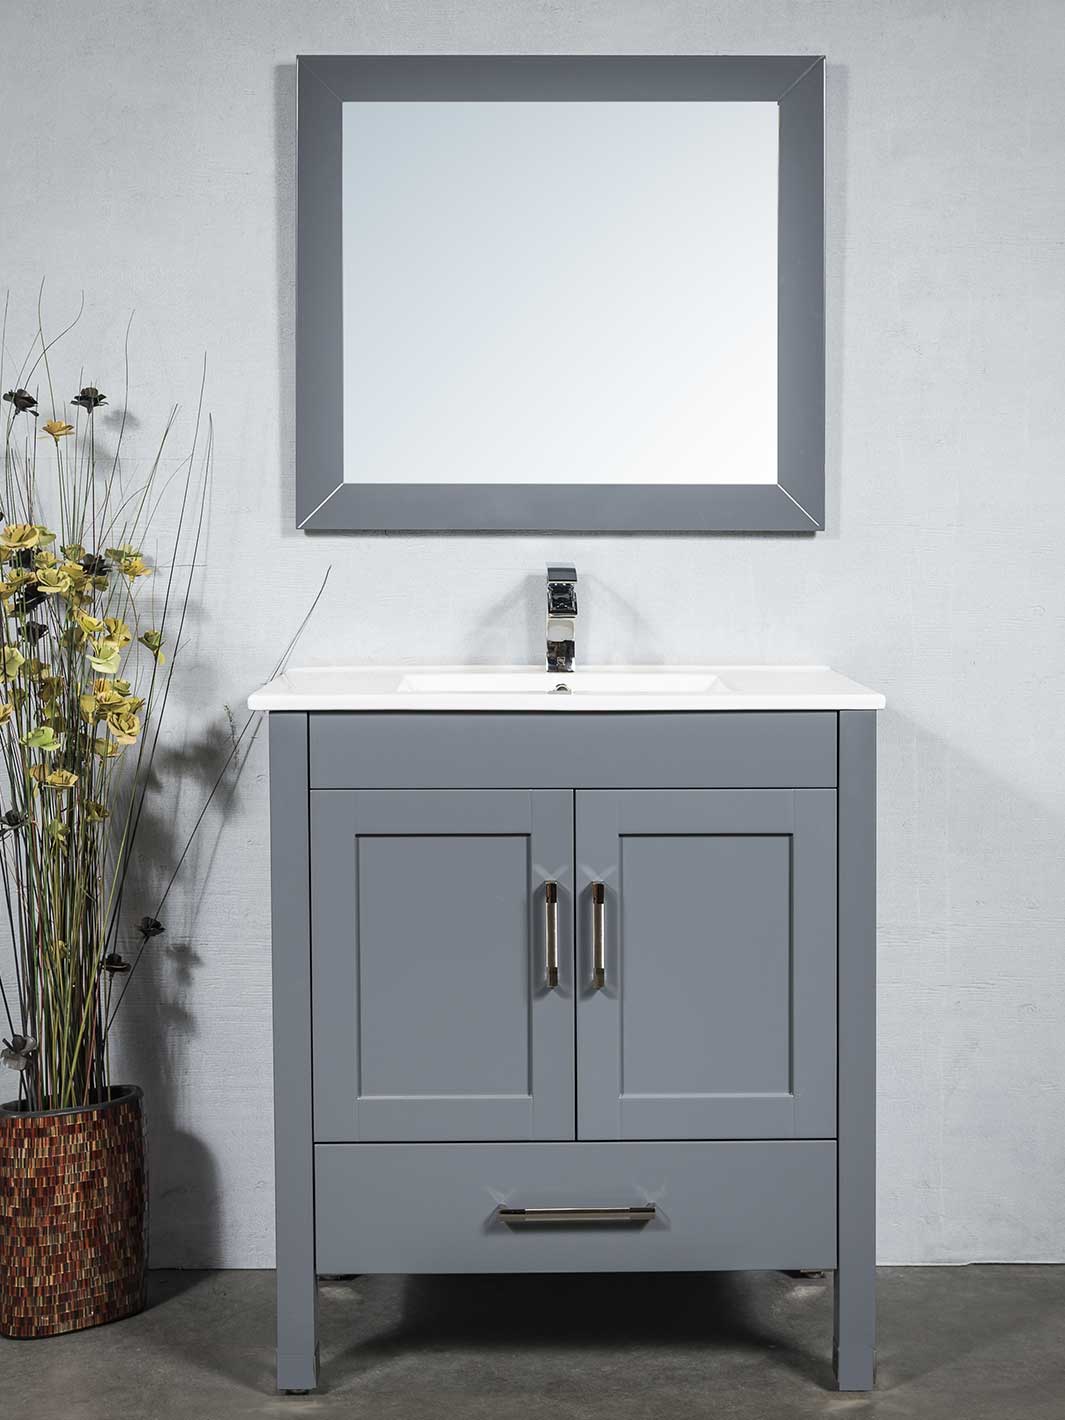 cabinet in grey with matching mirror. white ceramic sink. chrome faucet and pulls